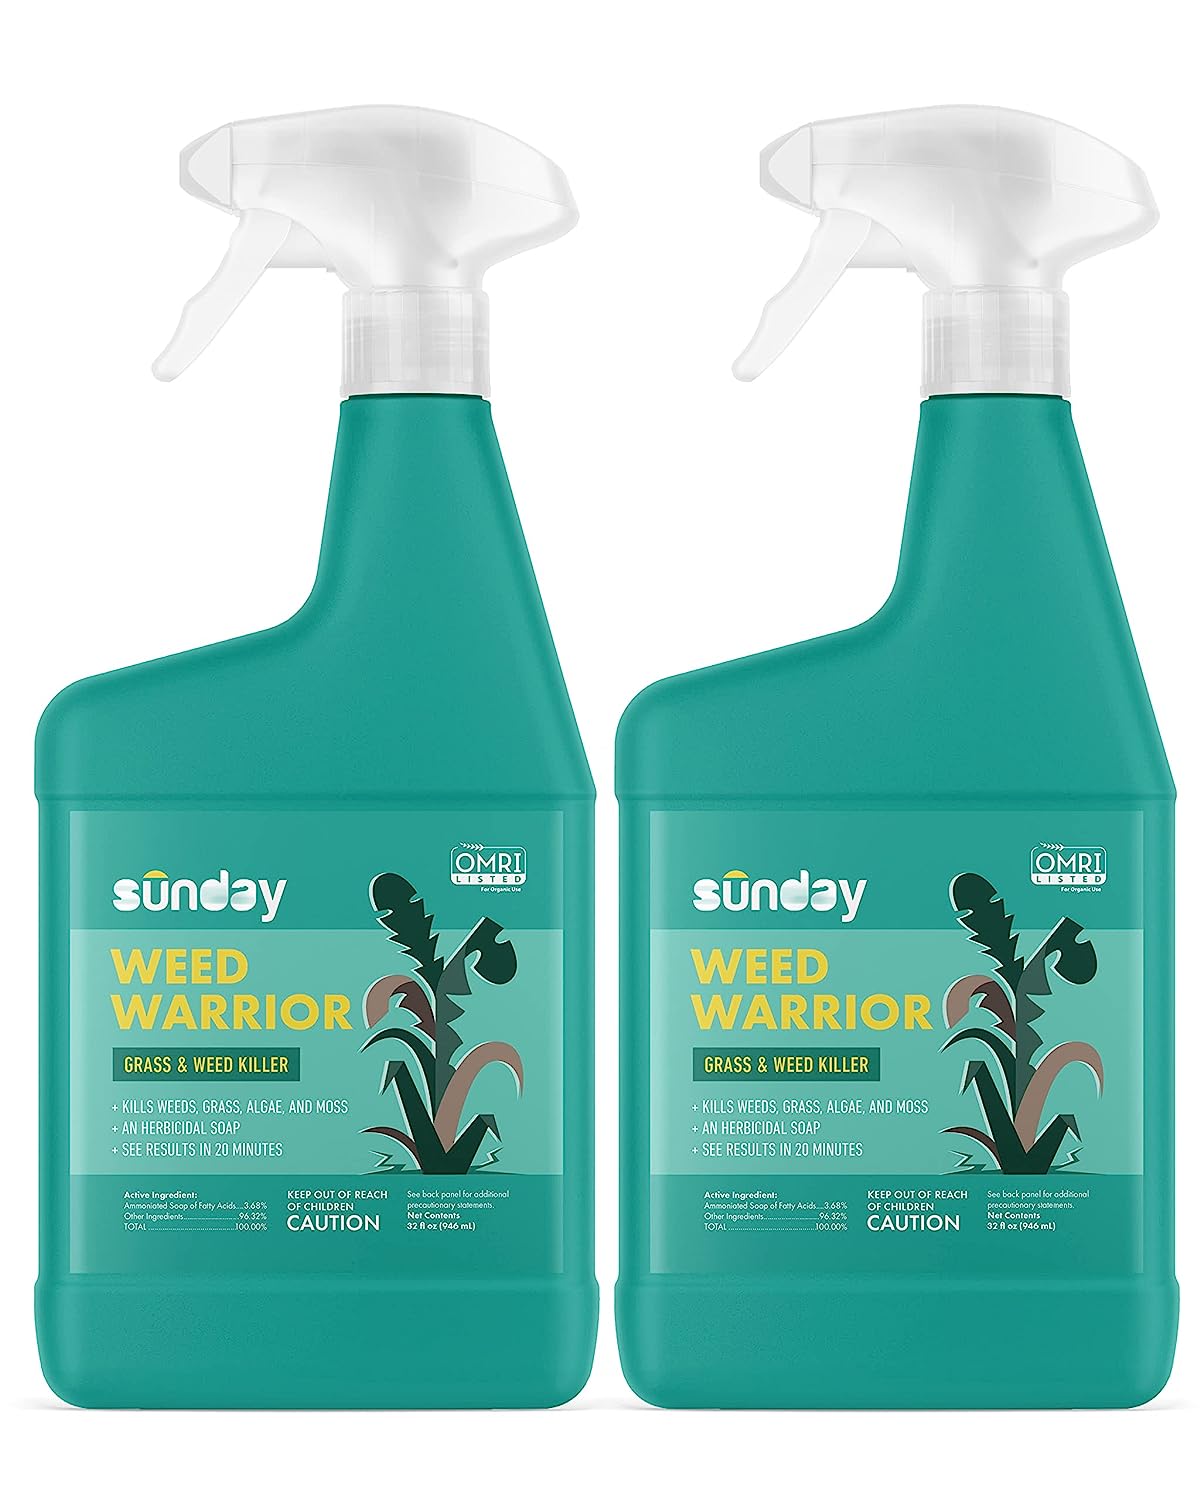 Sunday Weed Warrior, 32oz, 2 Pack - Grass & Weed [...]